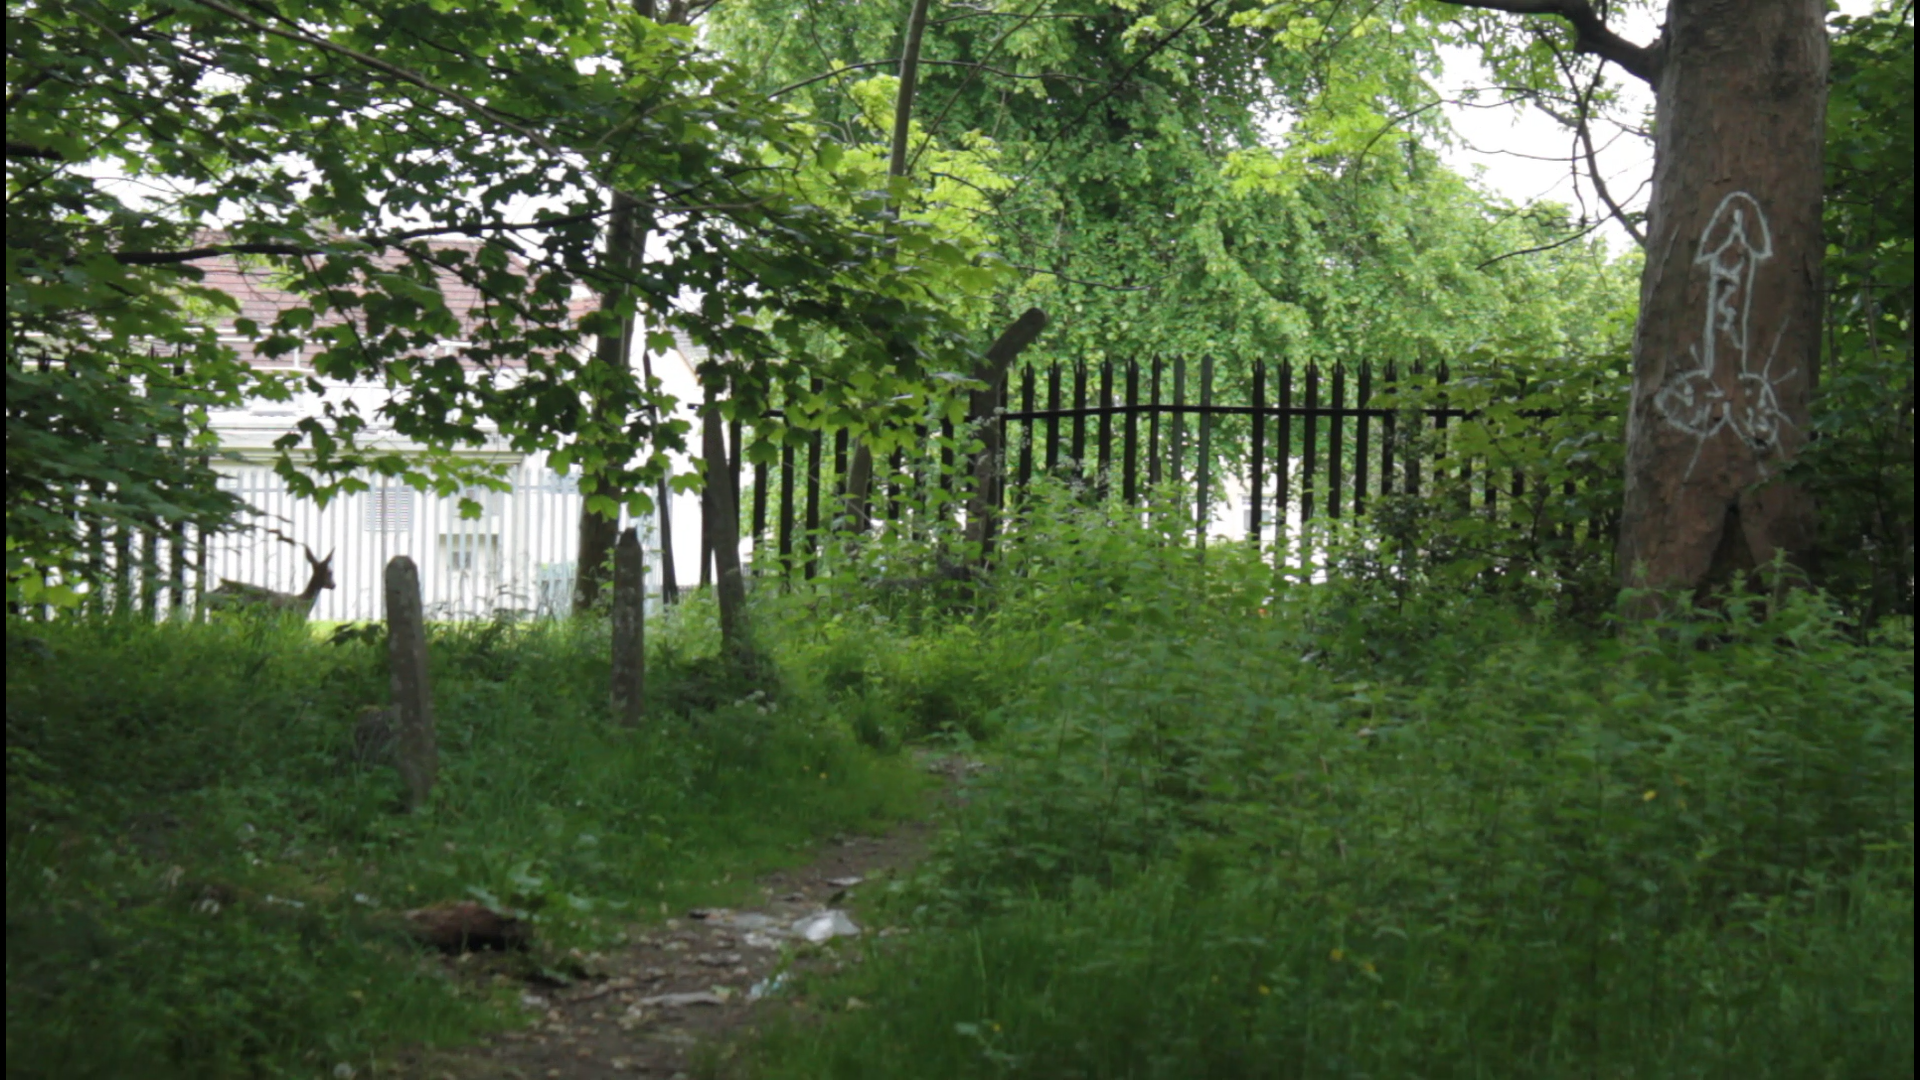 A landscape image of a scruffy path overgrown with grass and weeds. Graffitied on a tree trunk is a penis